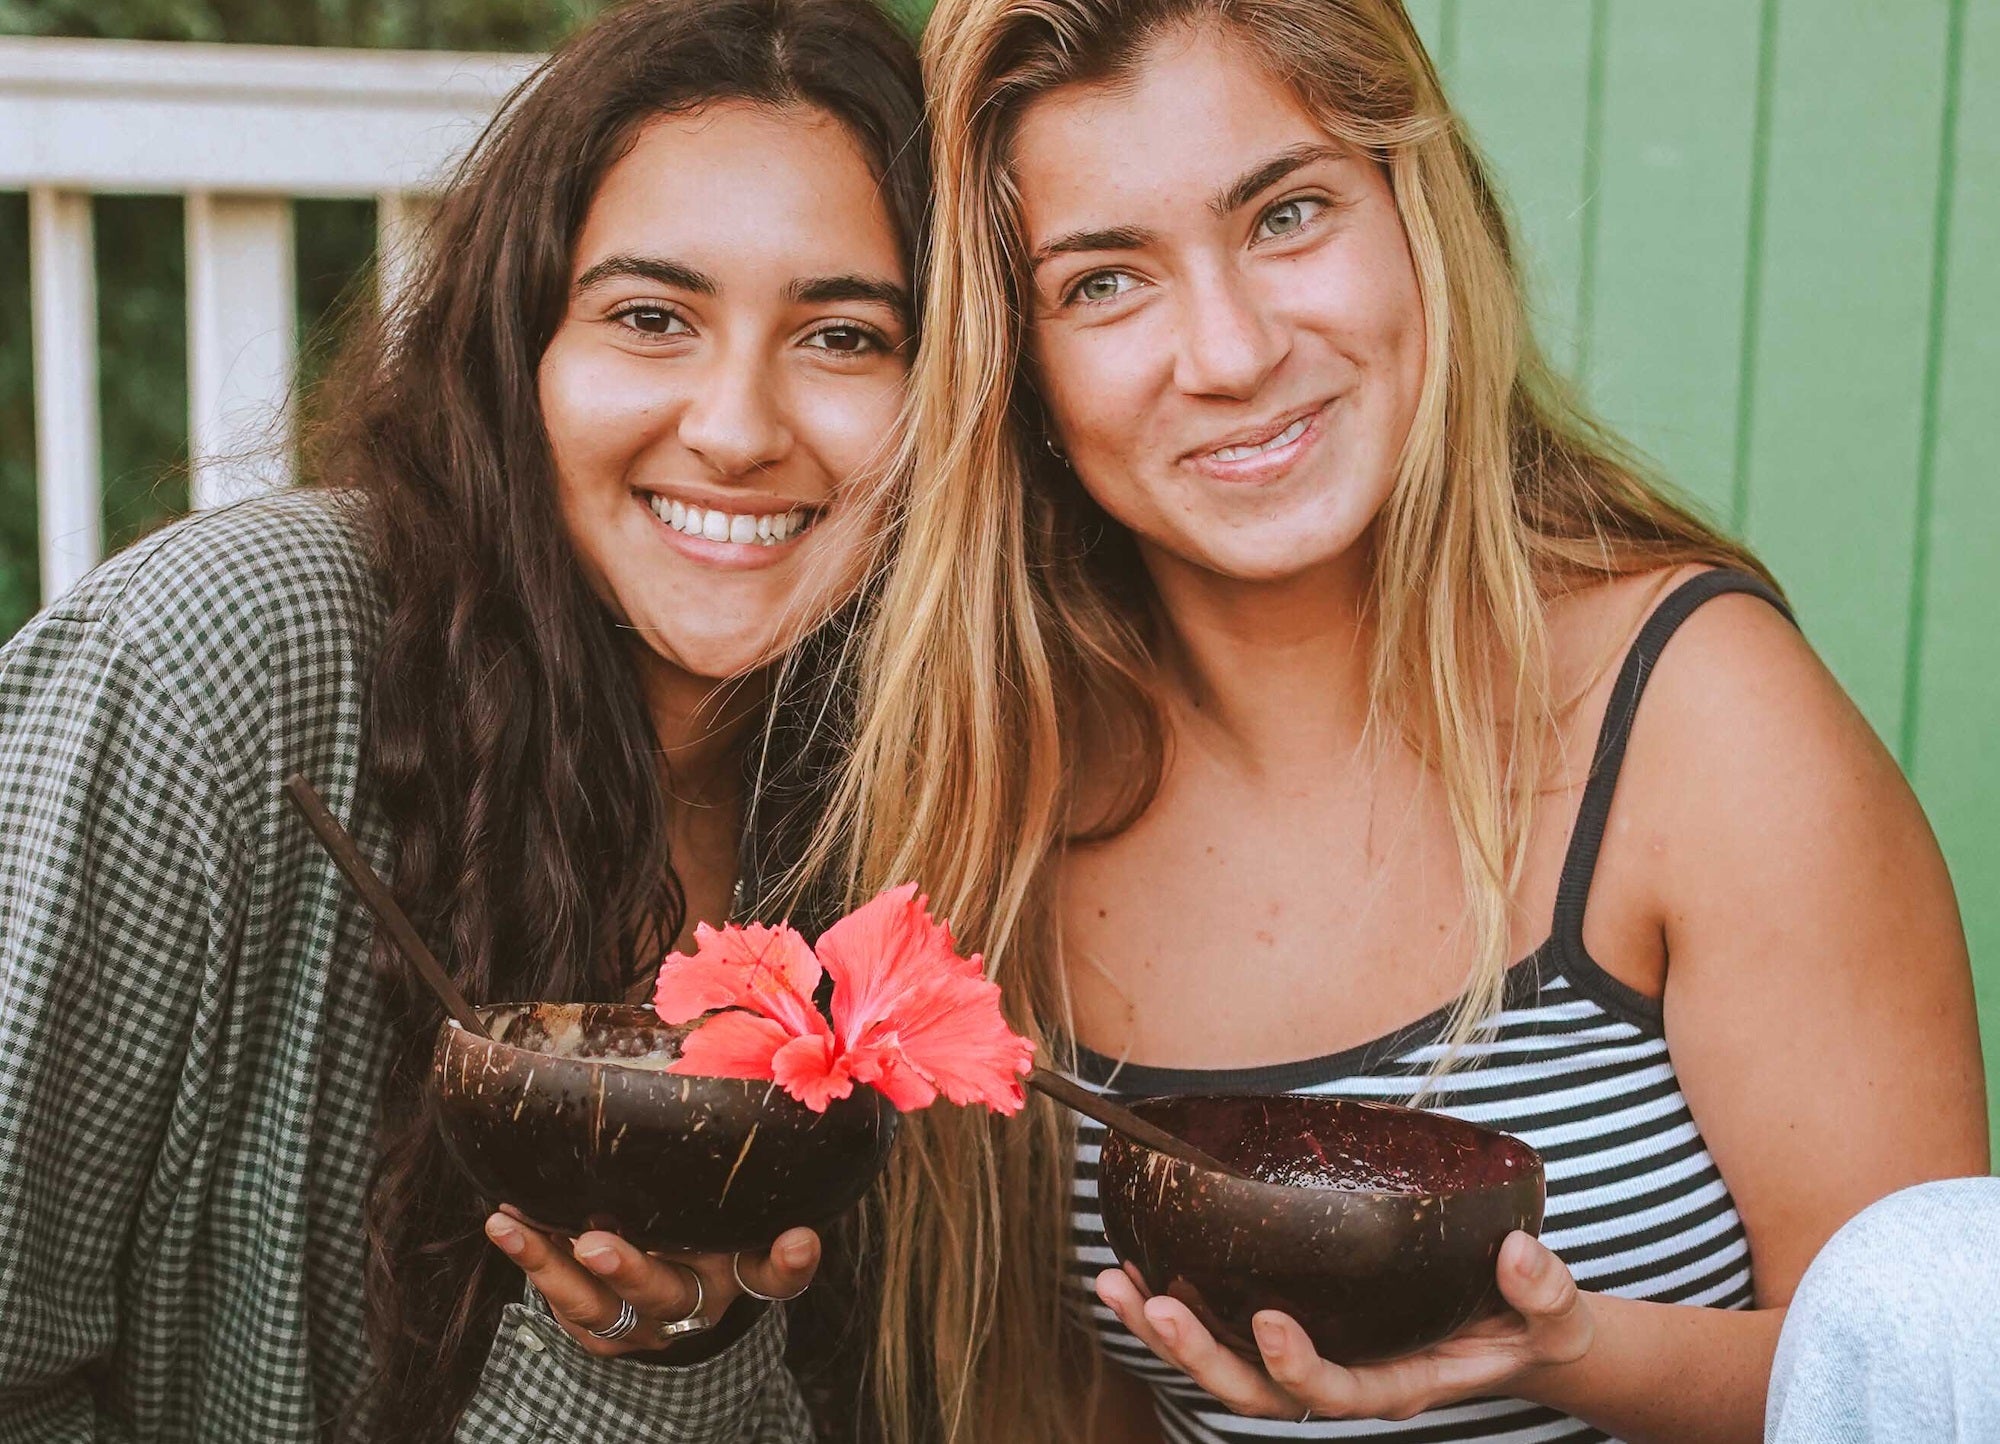 Coco Bowls makes the highest quality organic, all-natural, coconut bowls, wooden cutlery, bamoo straws, and other eco-accessories for smoothie bowls and more. We are constantly on the hunt for the best smoothie bowl recipes and eco-living inspiration! 